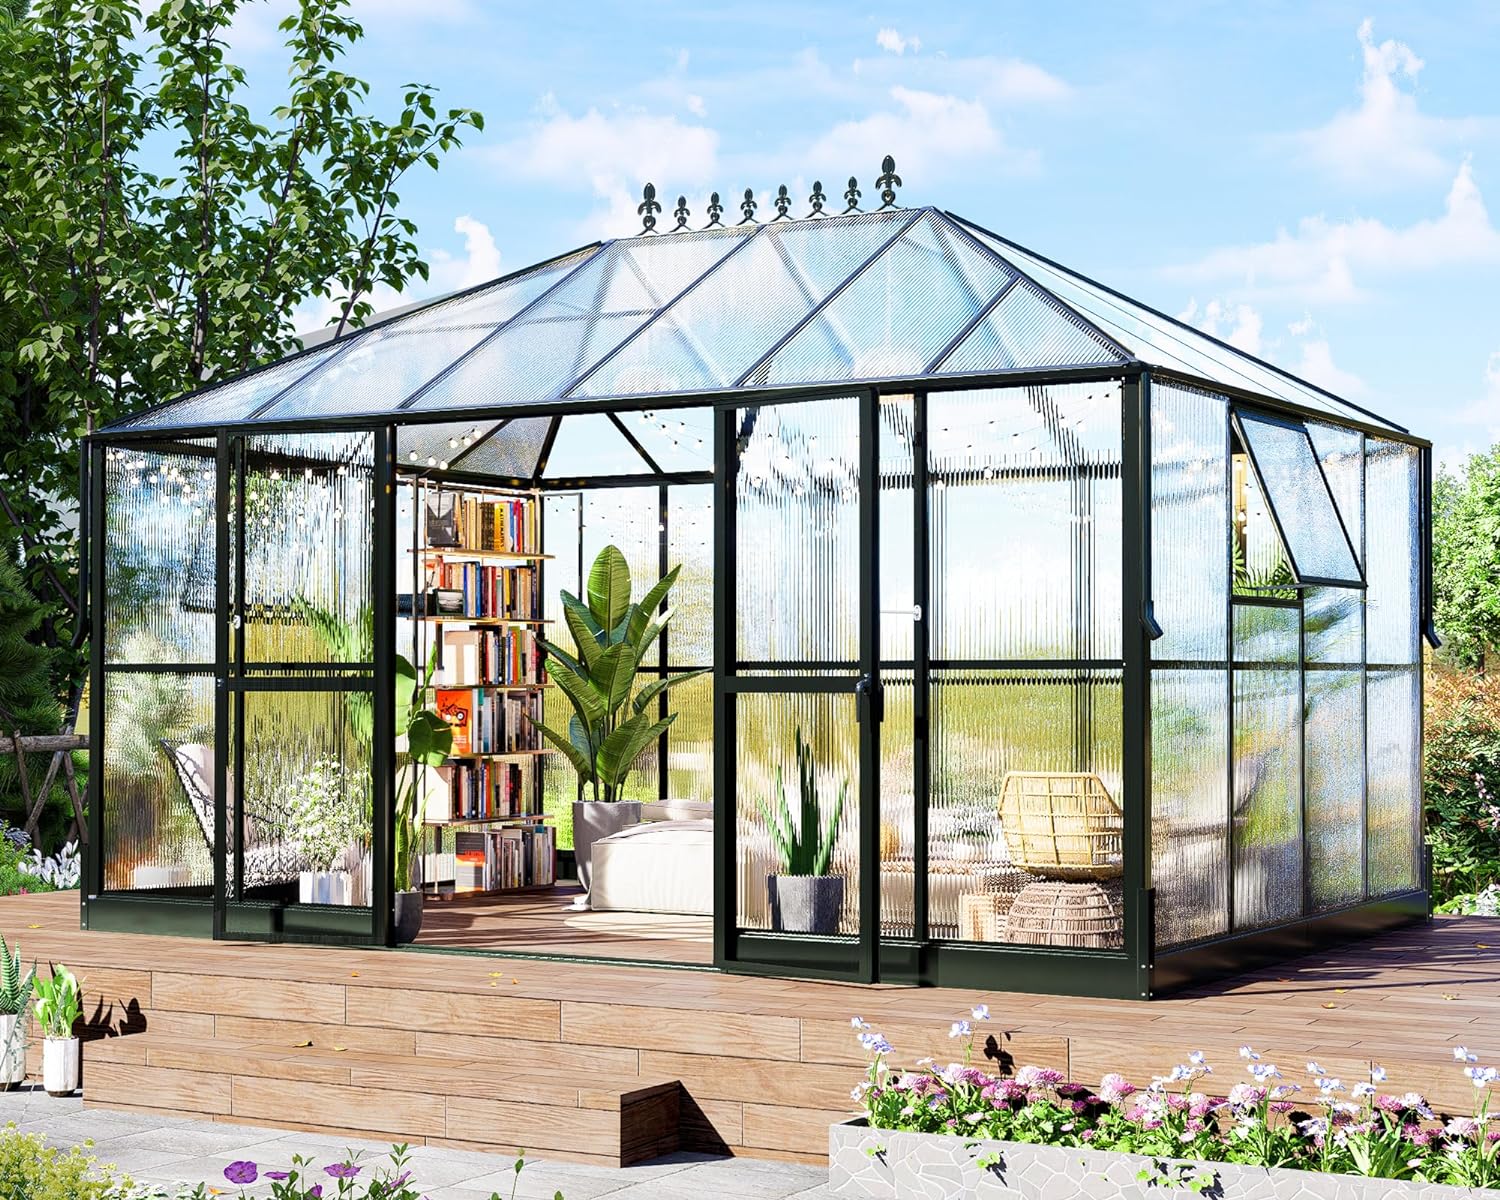 AMERLIFE 14x9.5x9 FT Polycarbonate Greenhouse Double Swing Doors 2 Vents 6FT Added Wall Height, Walk-in Large Winter Greenhouse Sunroom Aluminum Greenhouse for Outdoors, Black - image 1 of 9